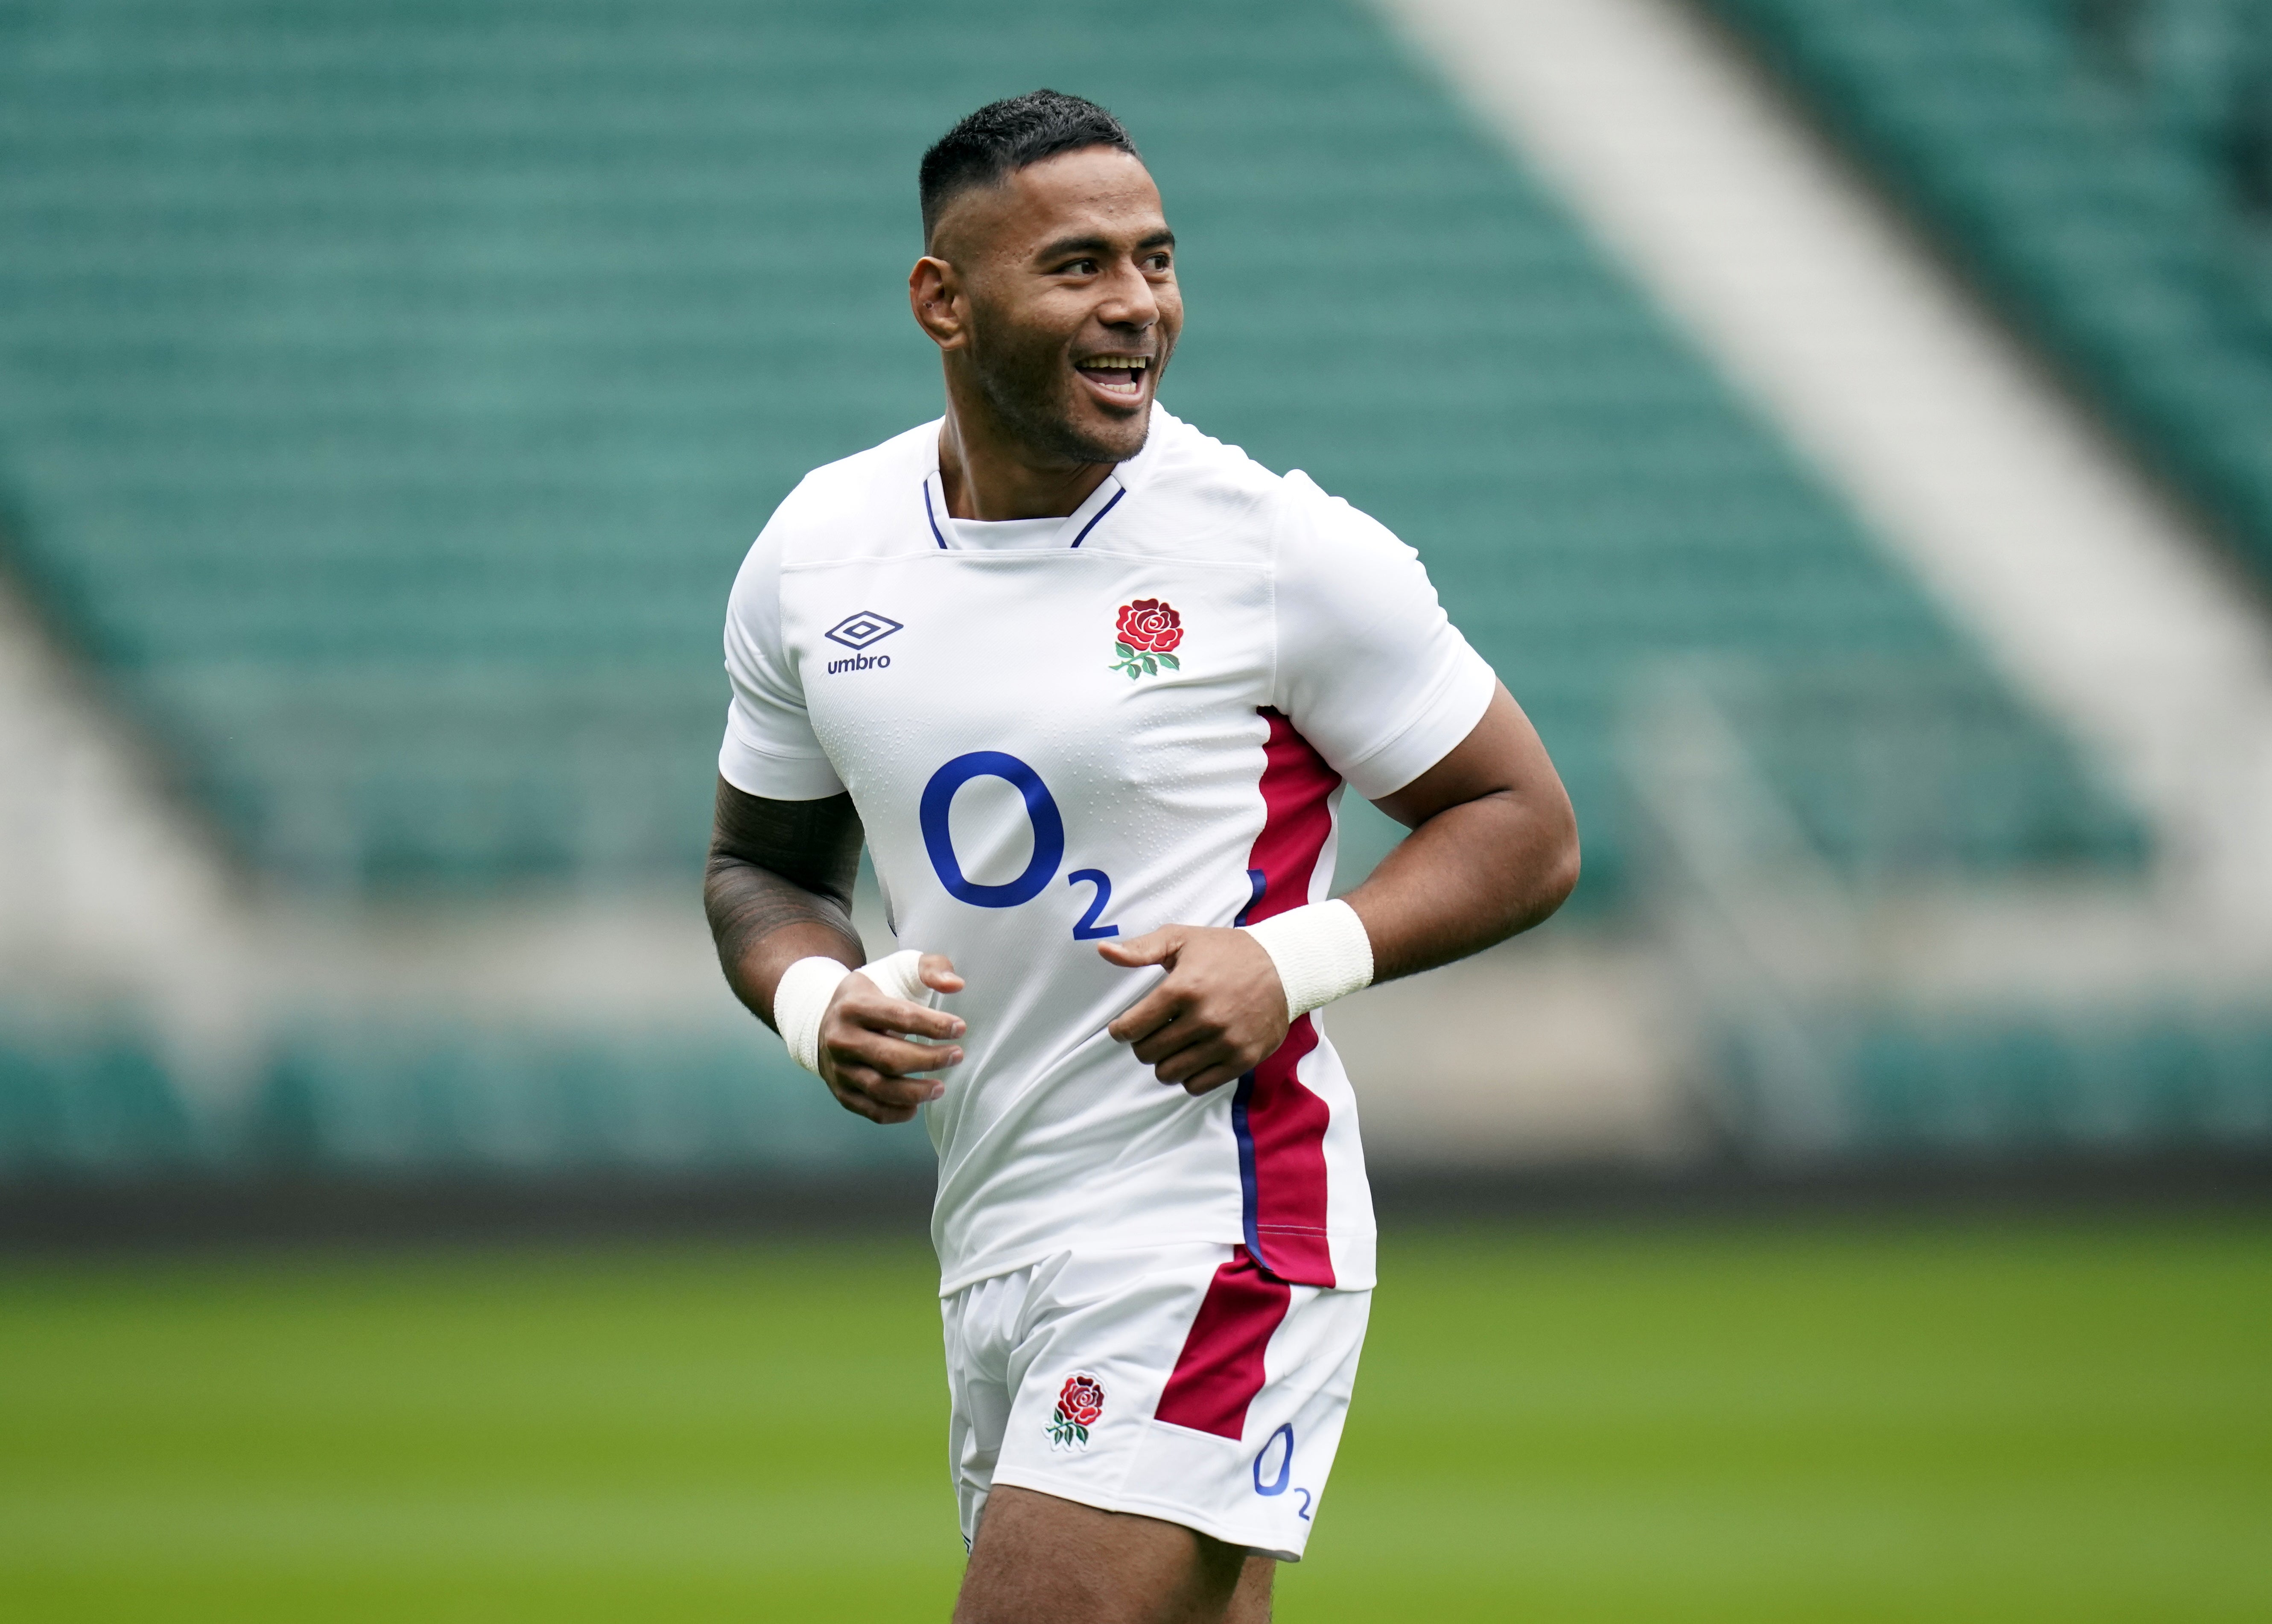 Manu Tuilagi has been England’s most destructive carrier for the last decade (Andrew Matthews/PA)